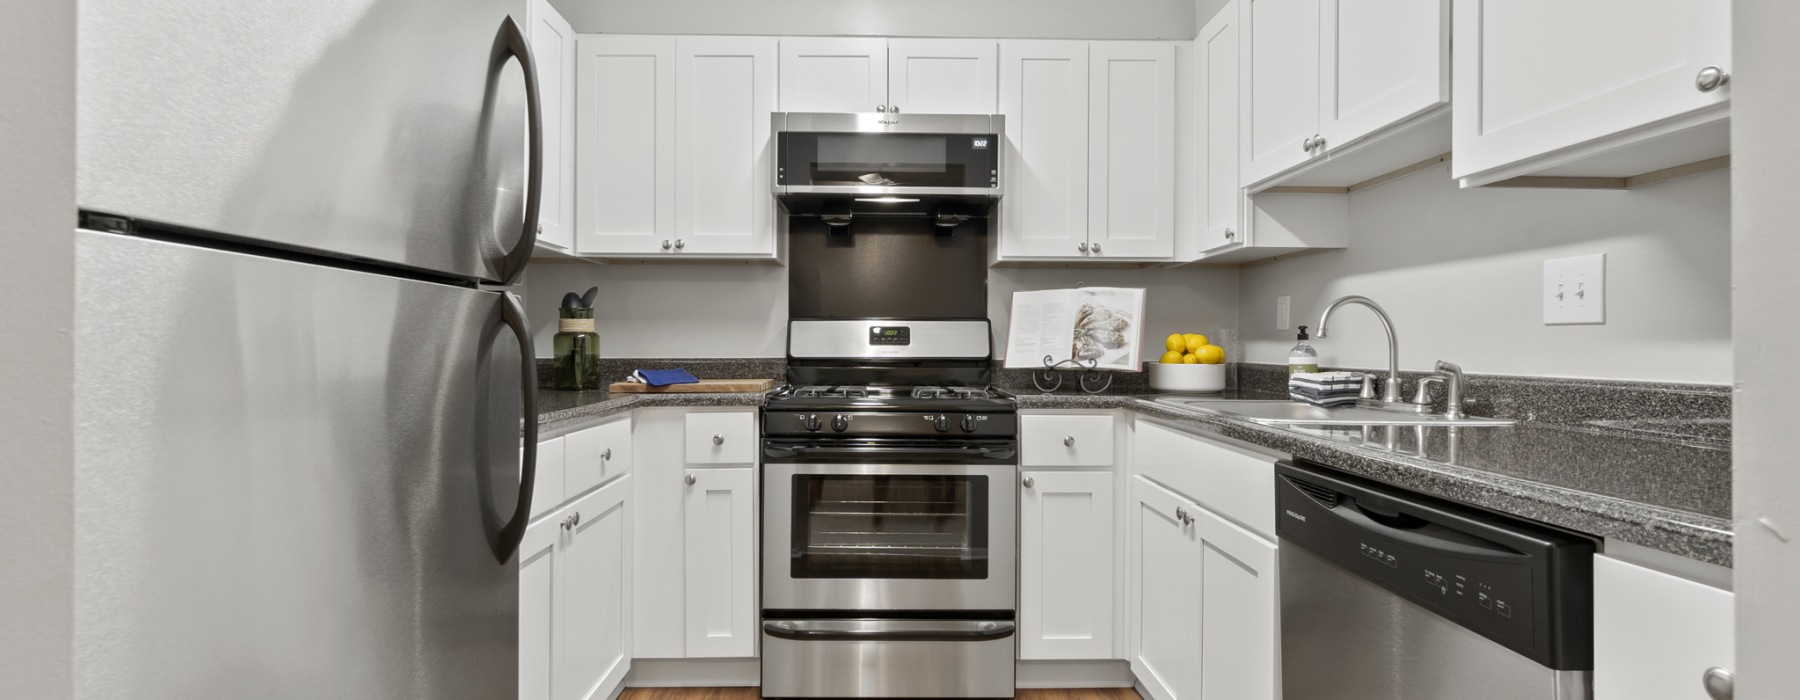 Renovated kitchens and stainless appliances